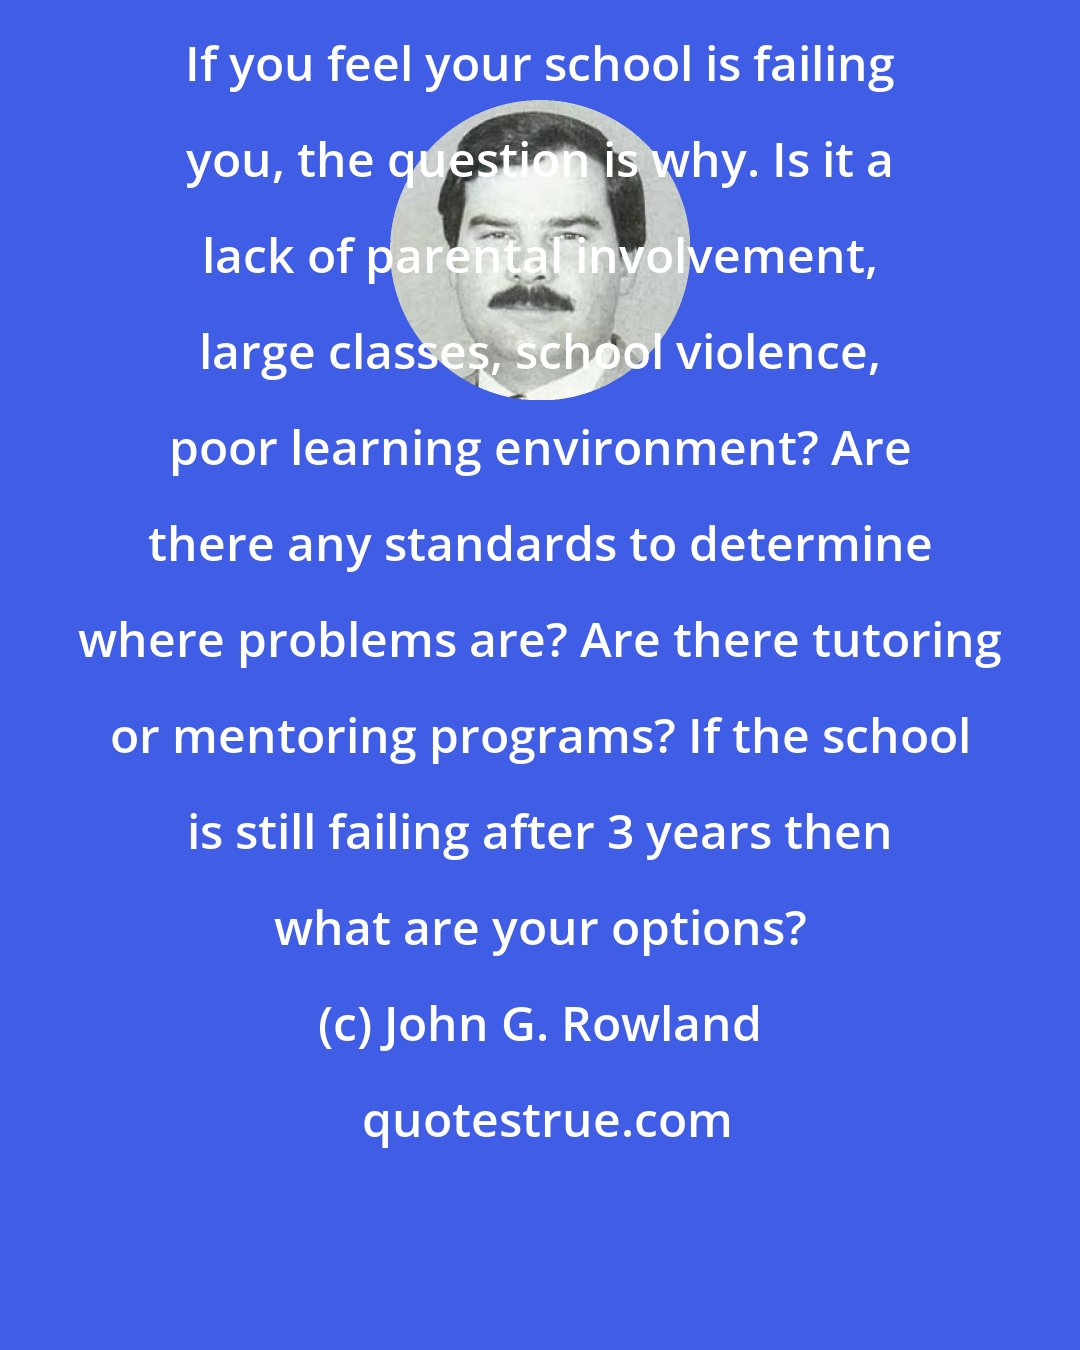 John G. Rowland: If you feel your school is failing you, the question is why. Is it a lack of parental involvement, large classes, school violence, poor learning environment? Are there any standards to determine where problems are? Are there tutoring or mentoring programs? If the school is still failing after 3 years then what are your options?